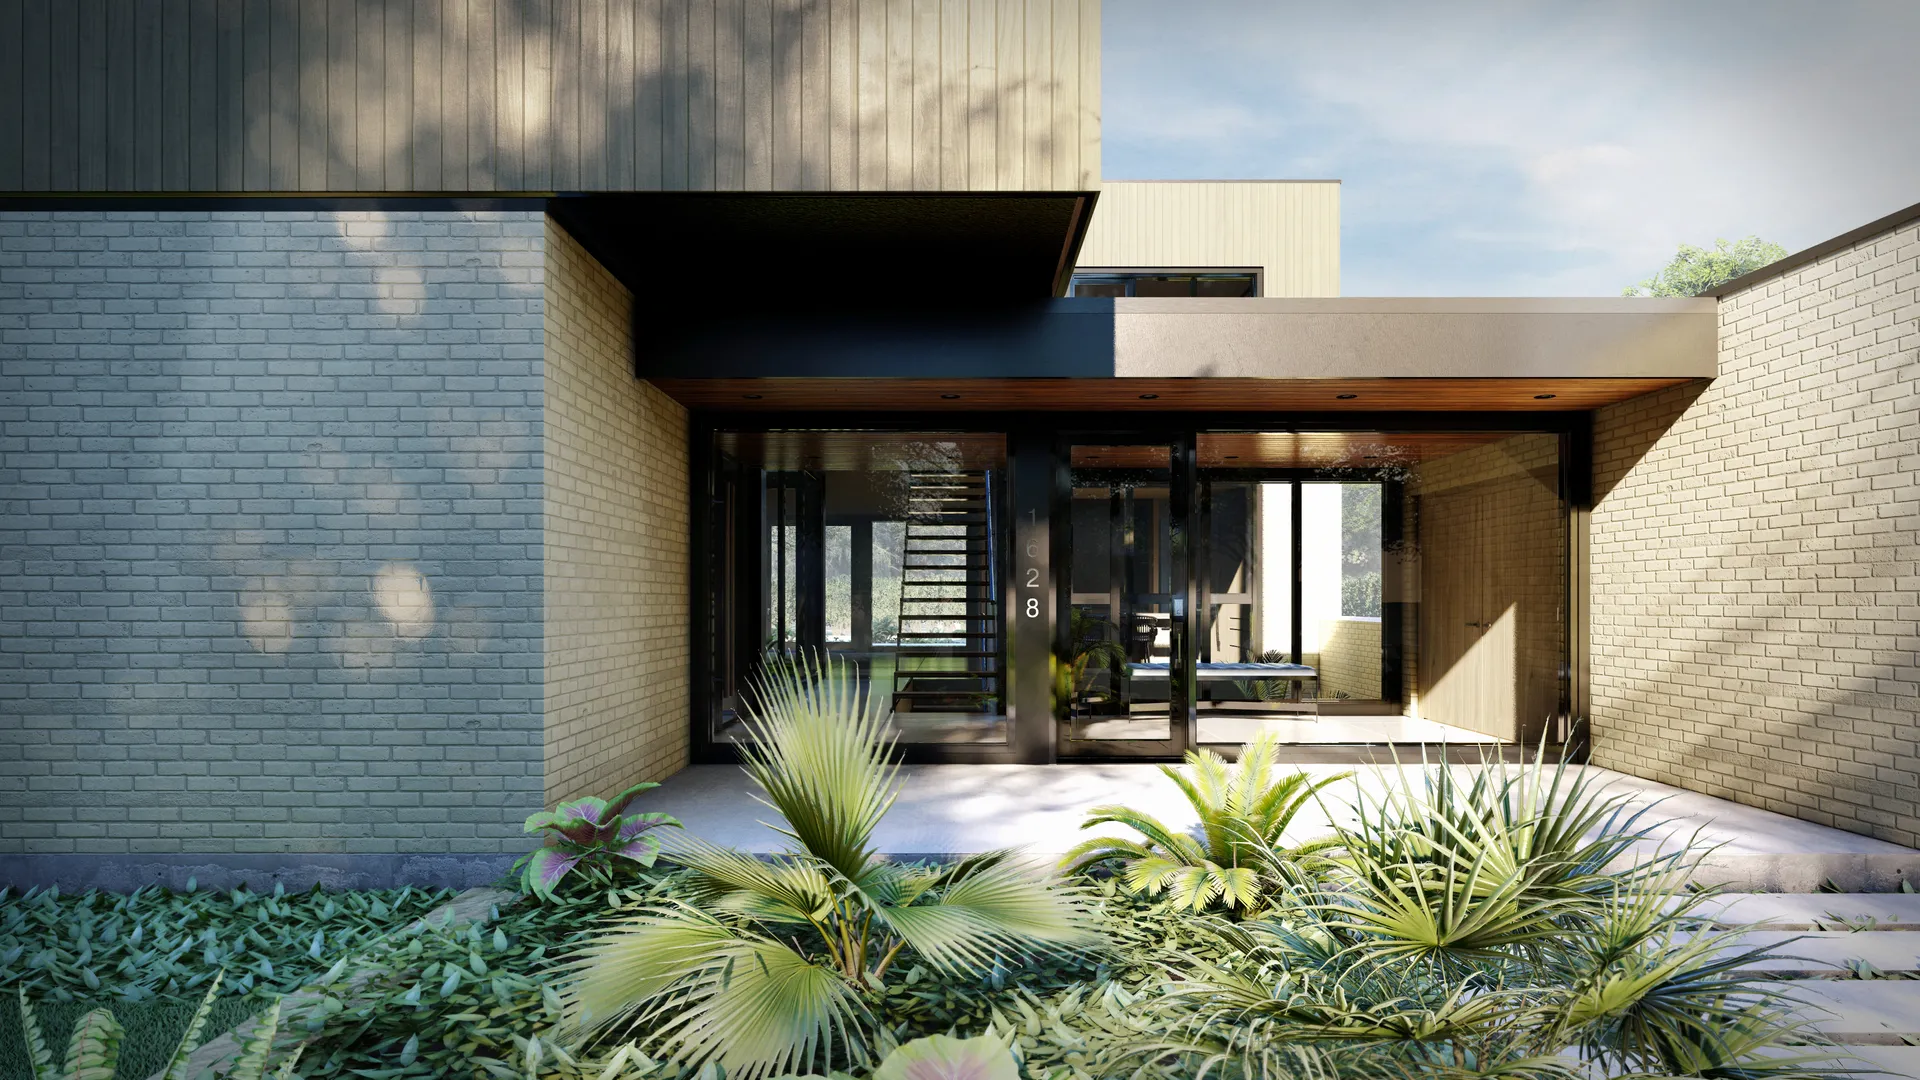 My Modern Home Plan No16 - 8 - Front Entrance